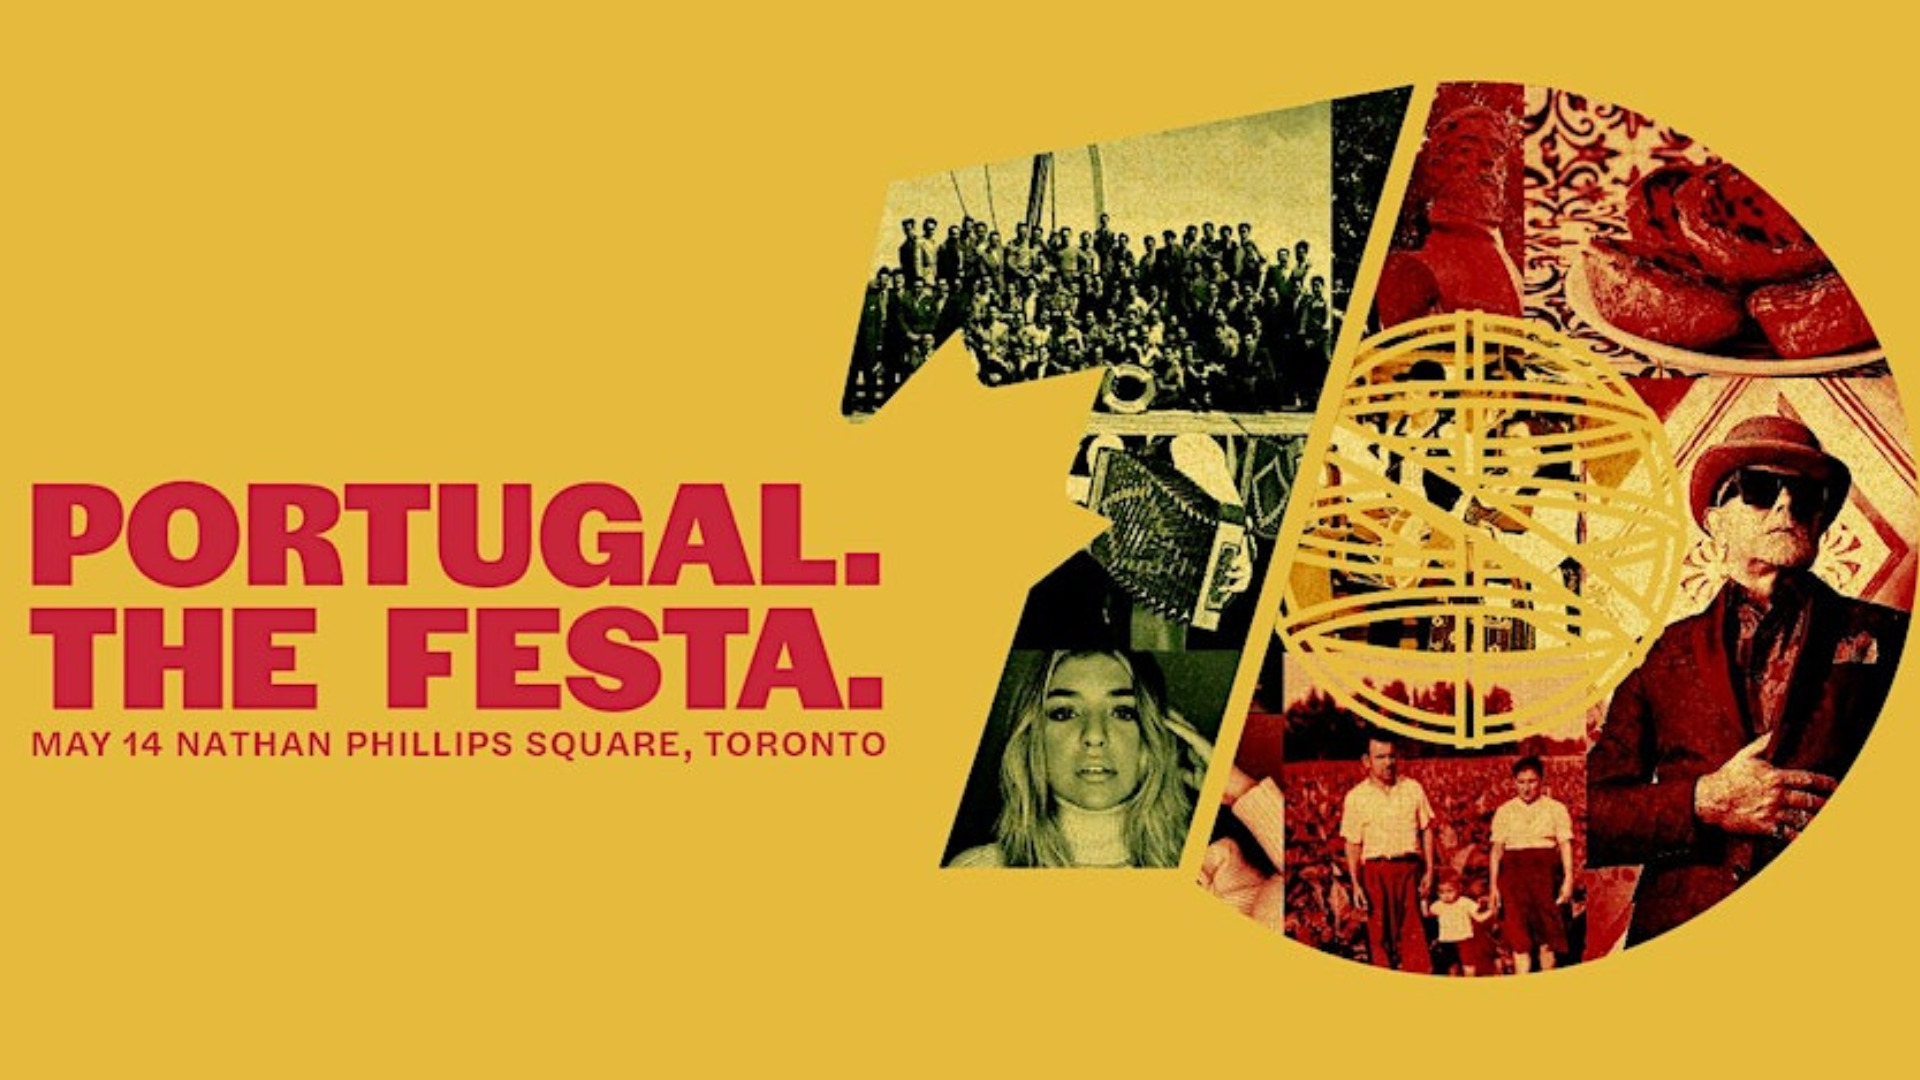 'Portugal - The Festa' is officially taking over Nathan Phillips Square — and we're so excited